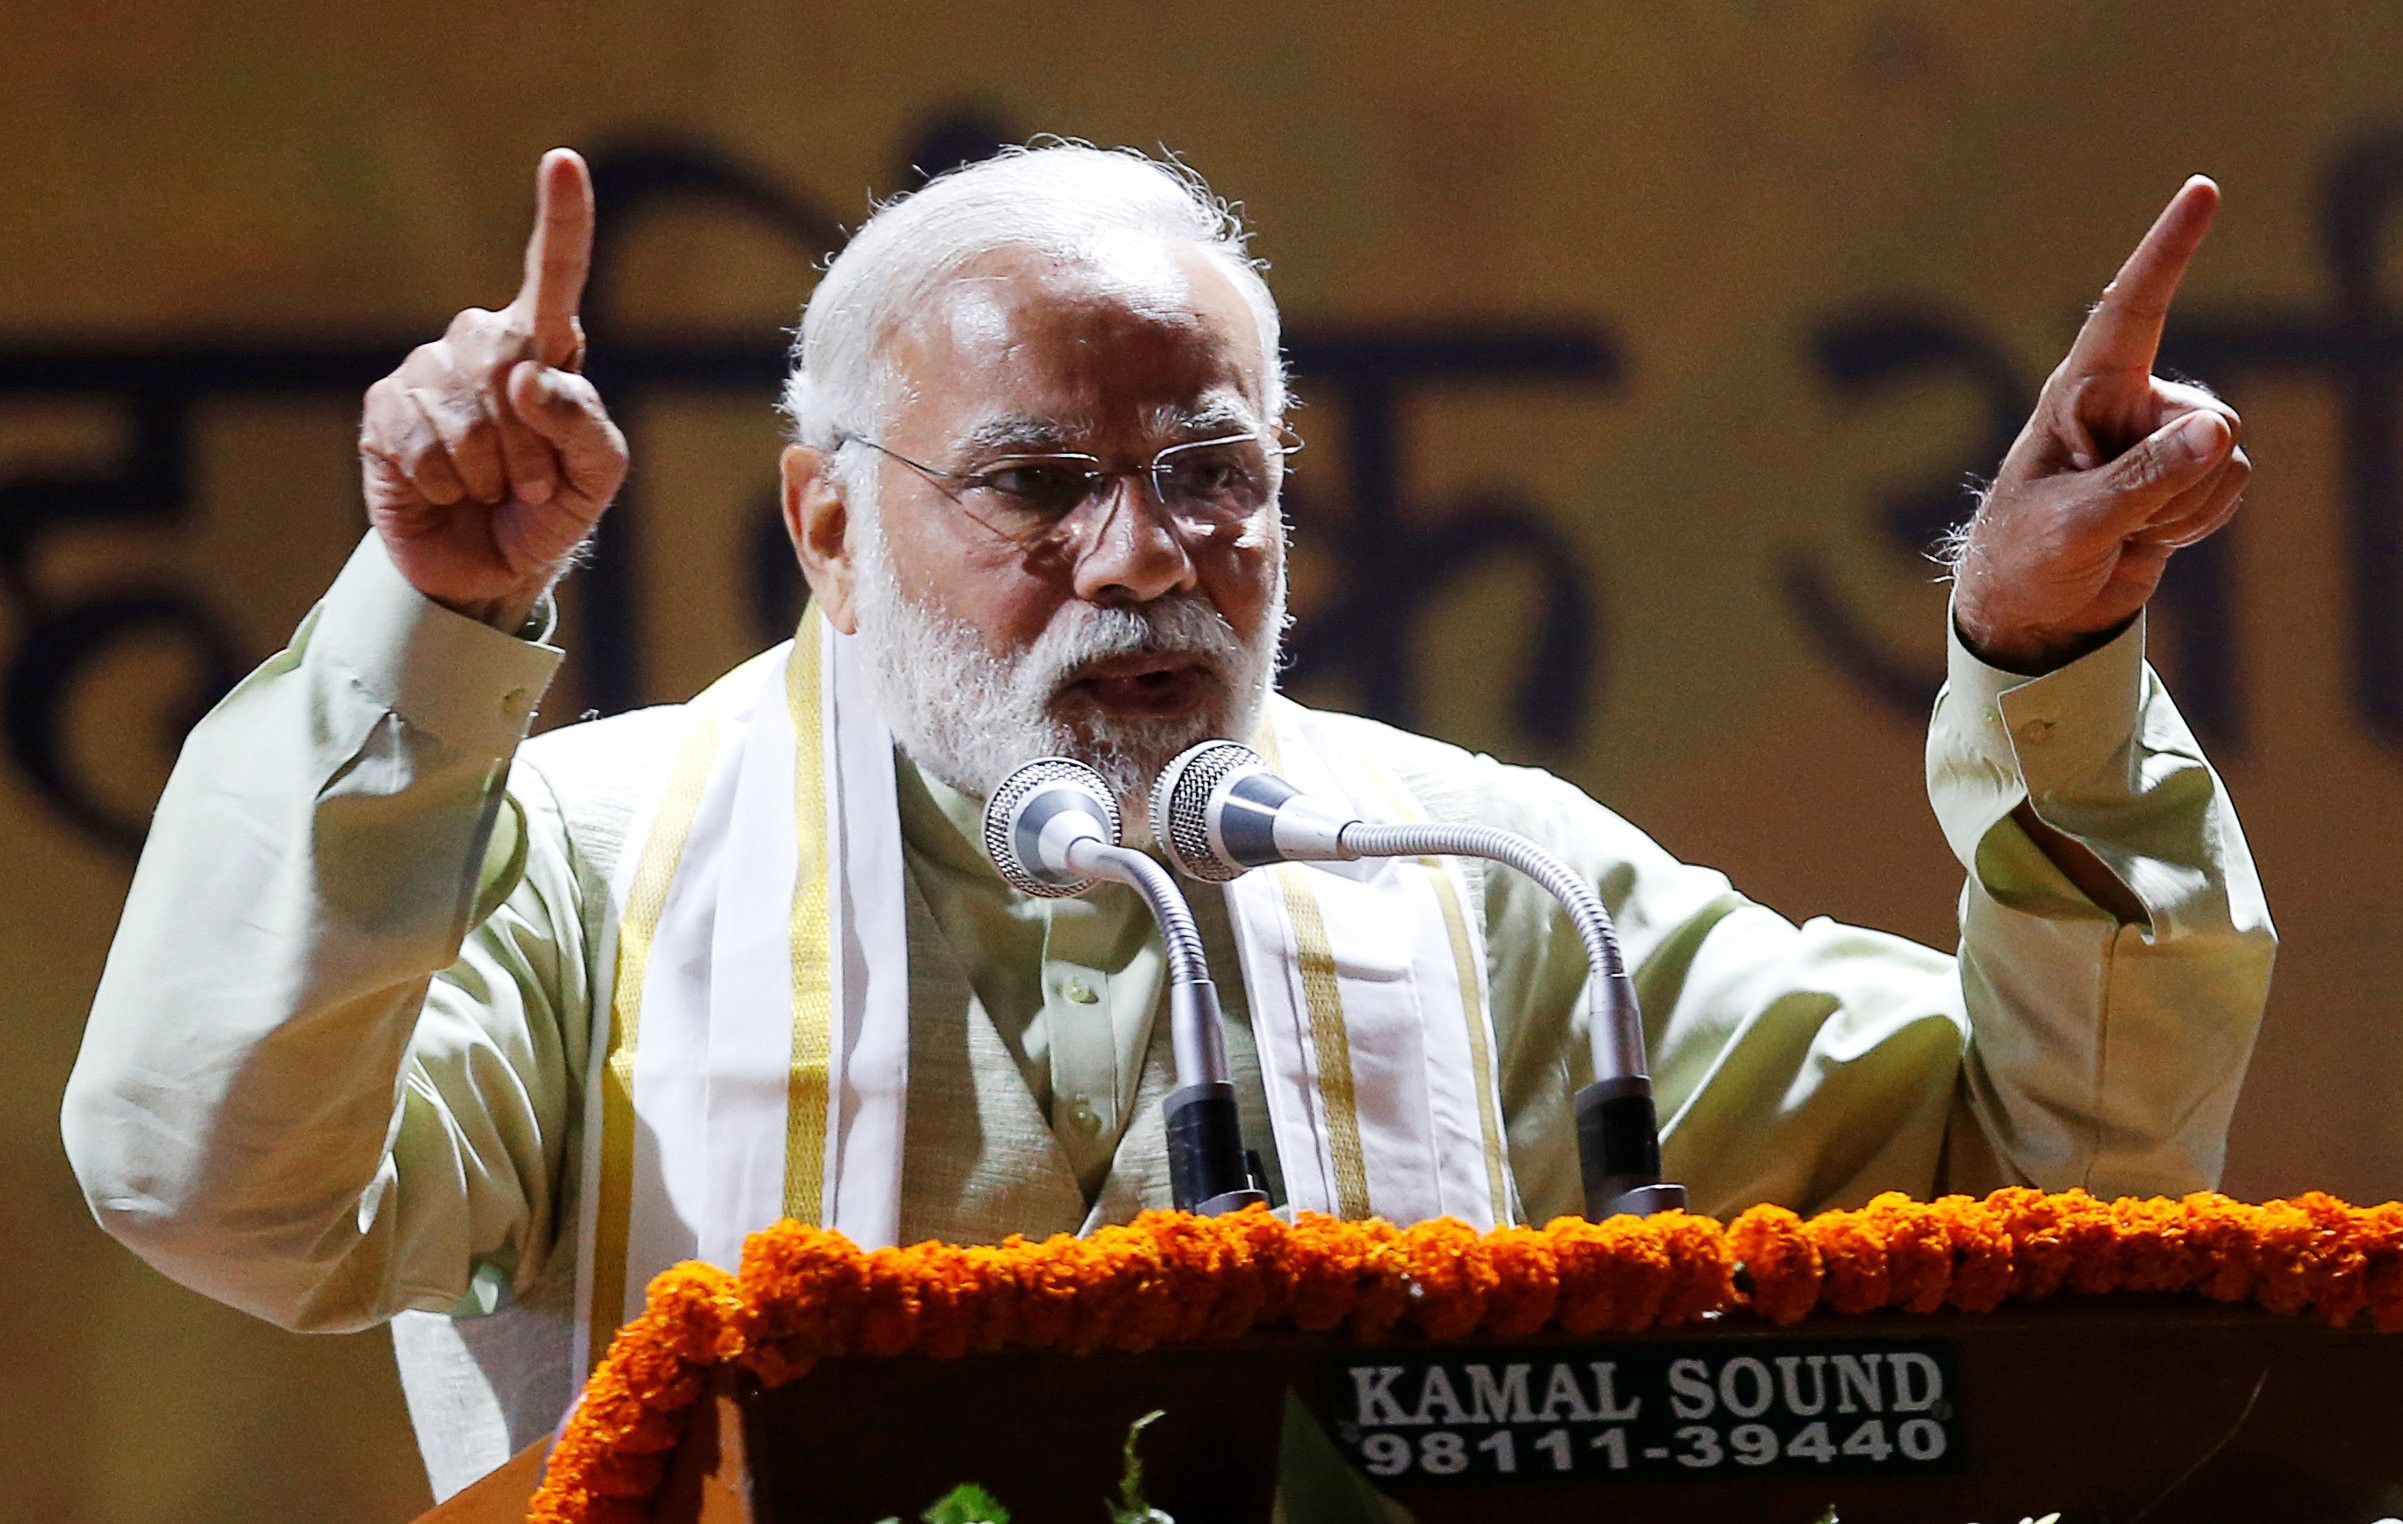 Prime Minister Narendra Modi of India addresses supporters at his Bharatiya Janata Party headquarters in New Delhi on March 12. Photo: Reuters